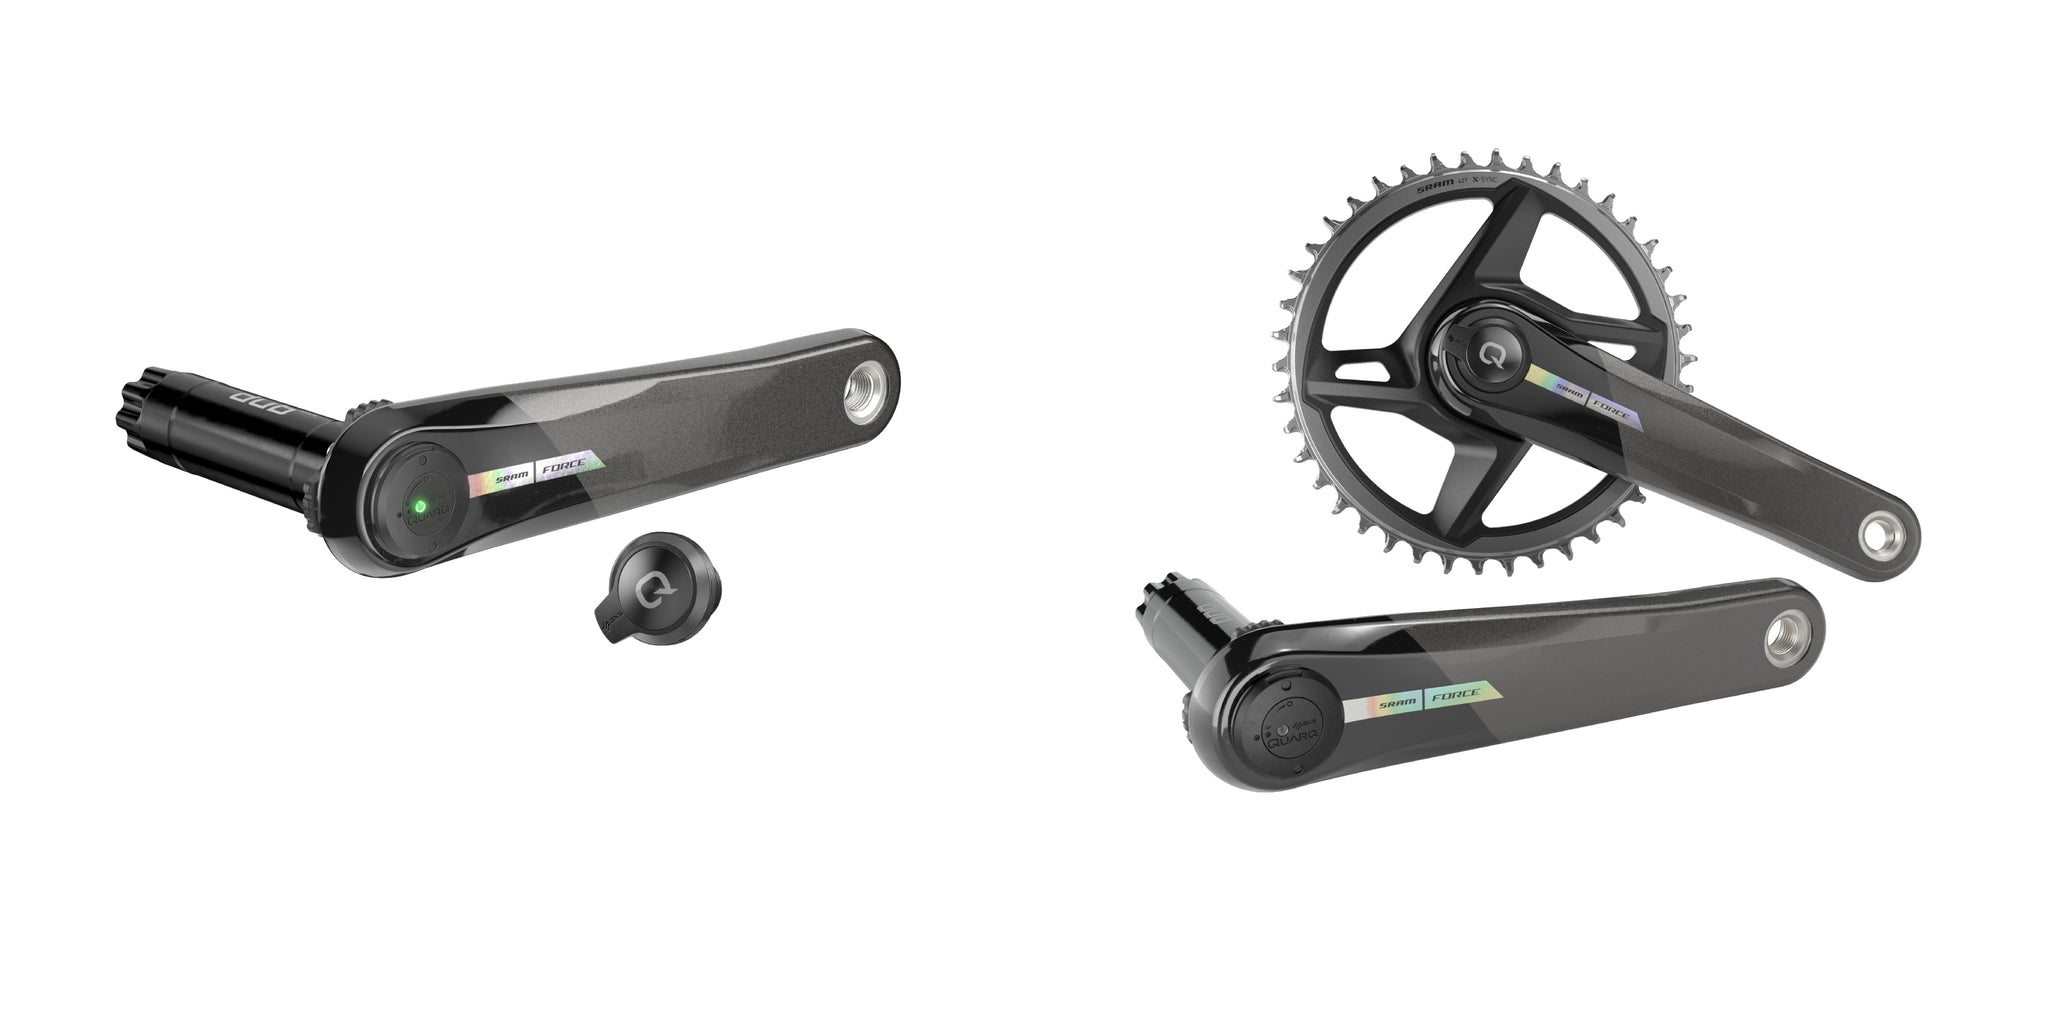 SRAM Force AXS spindle power meter